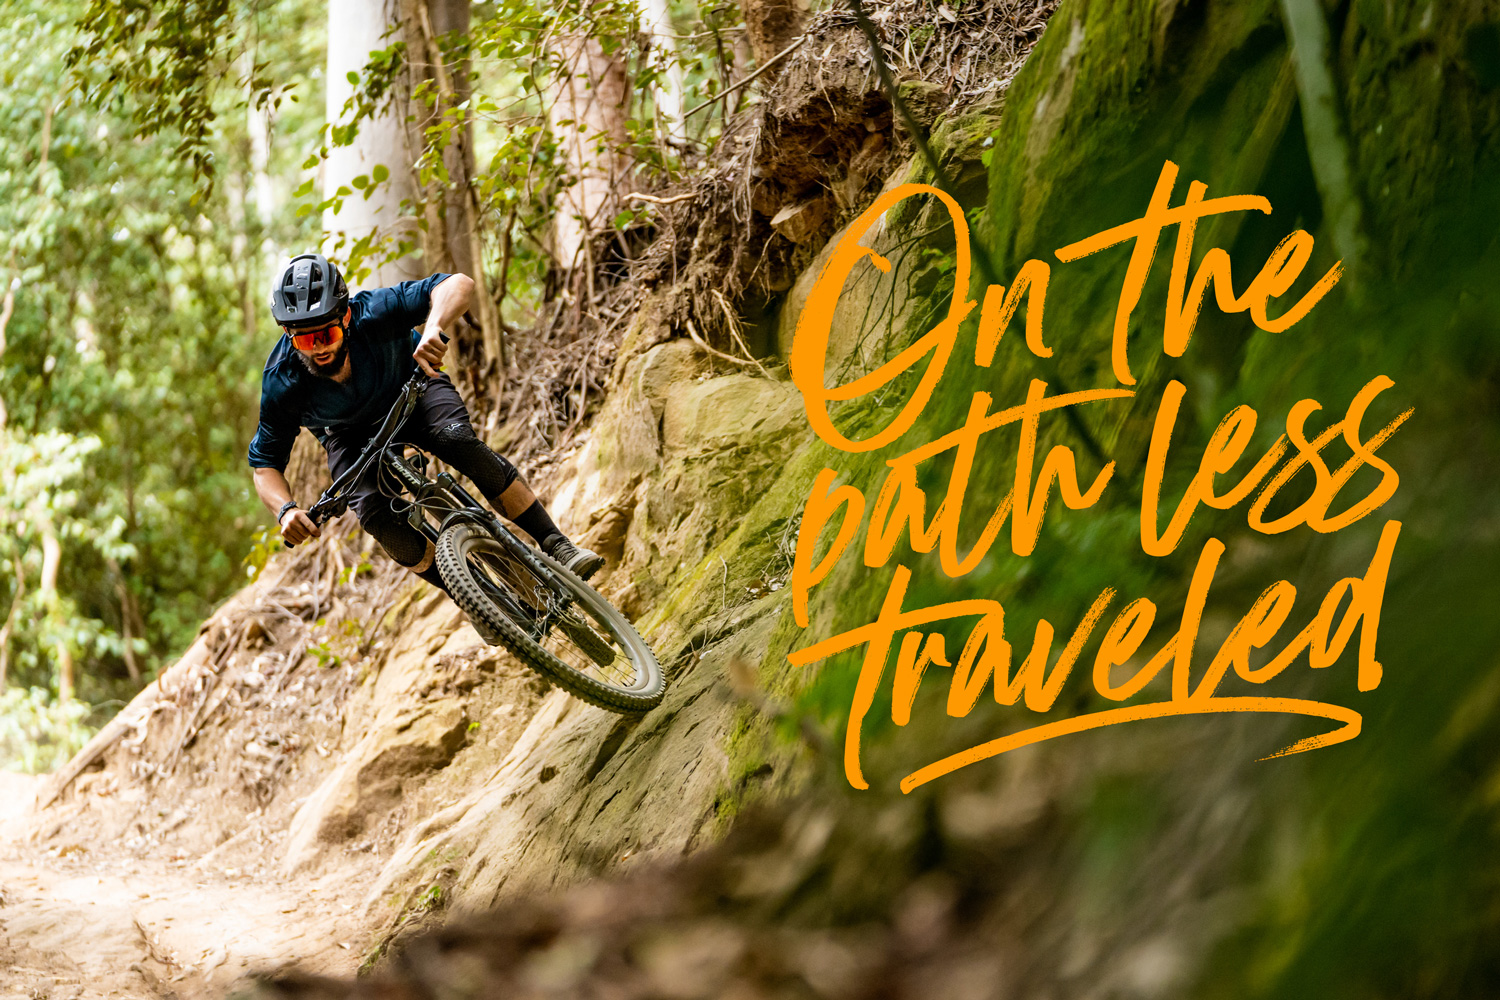 Post done by WOO Agency for Giant Bikes, showing a rider on a steep embankment of rocks on his Giant Bike